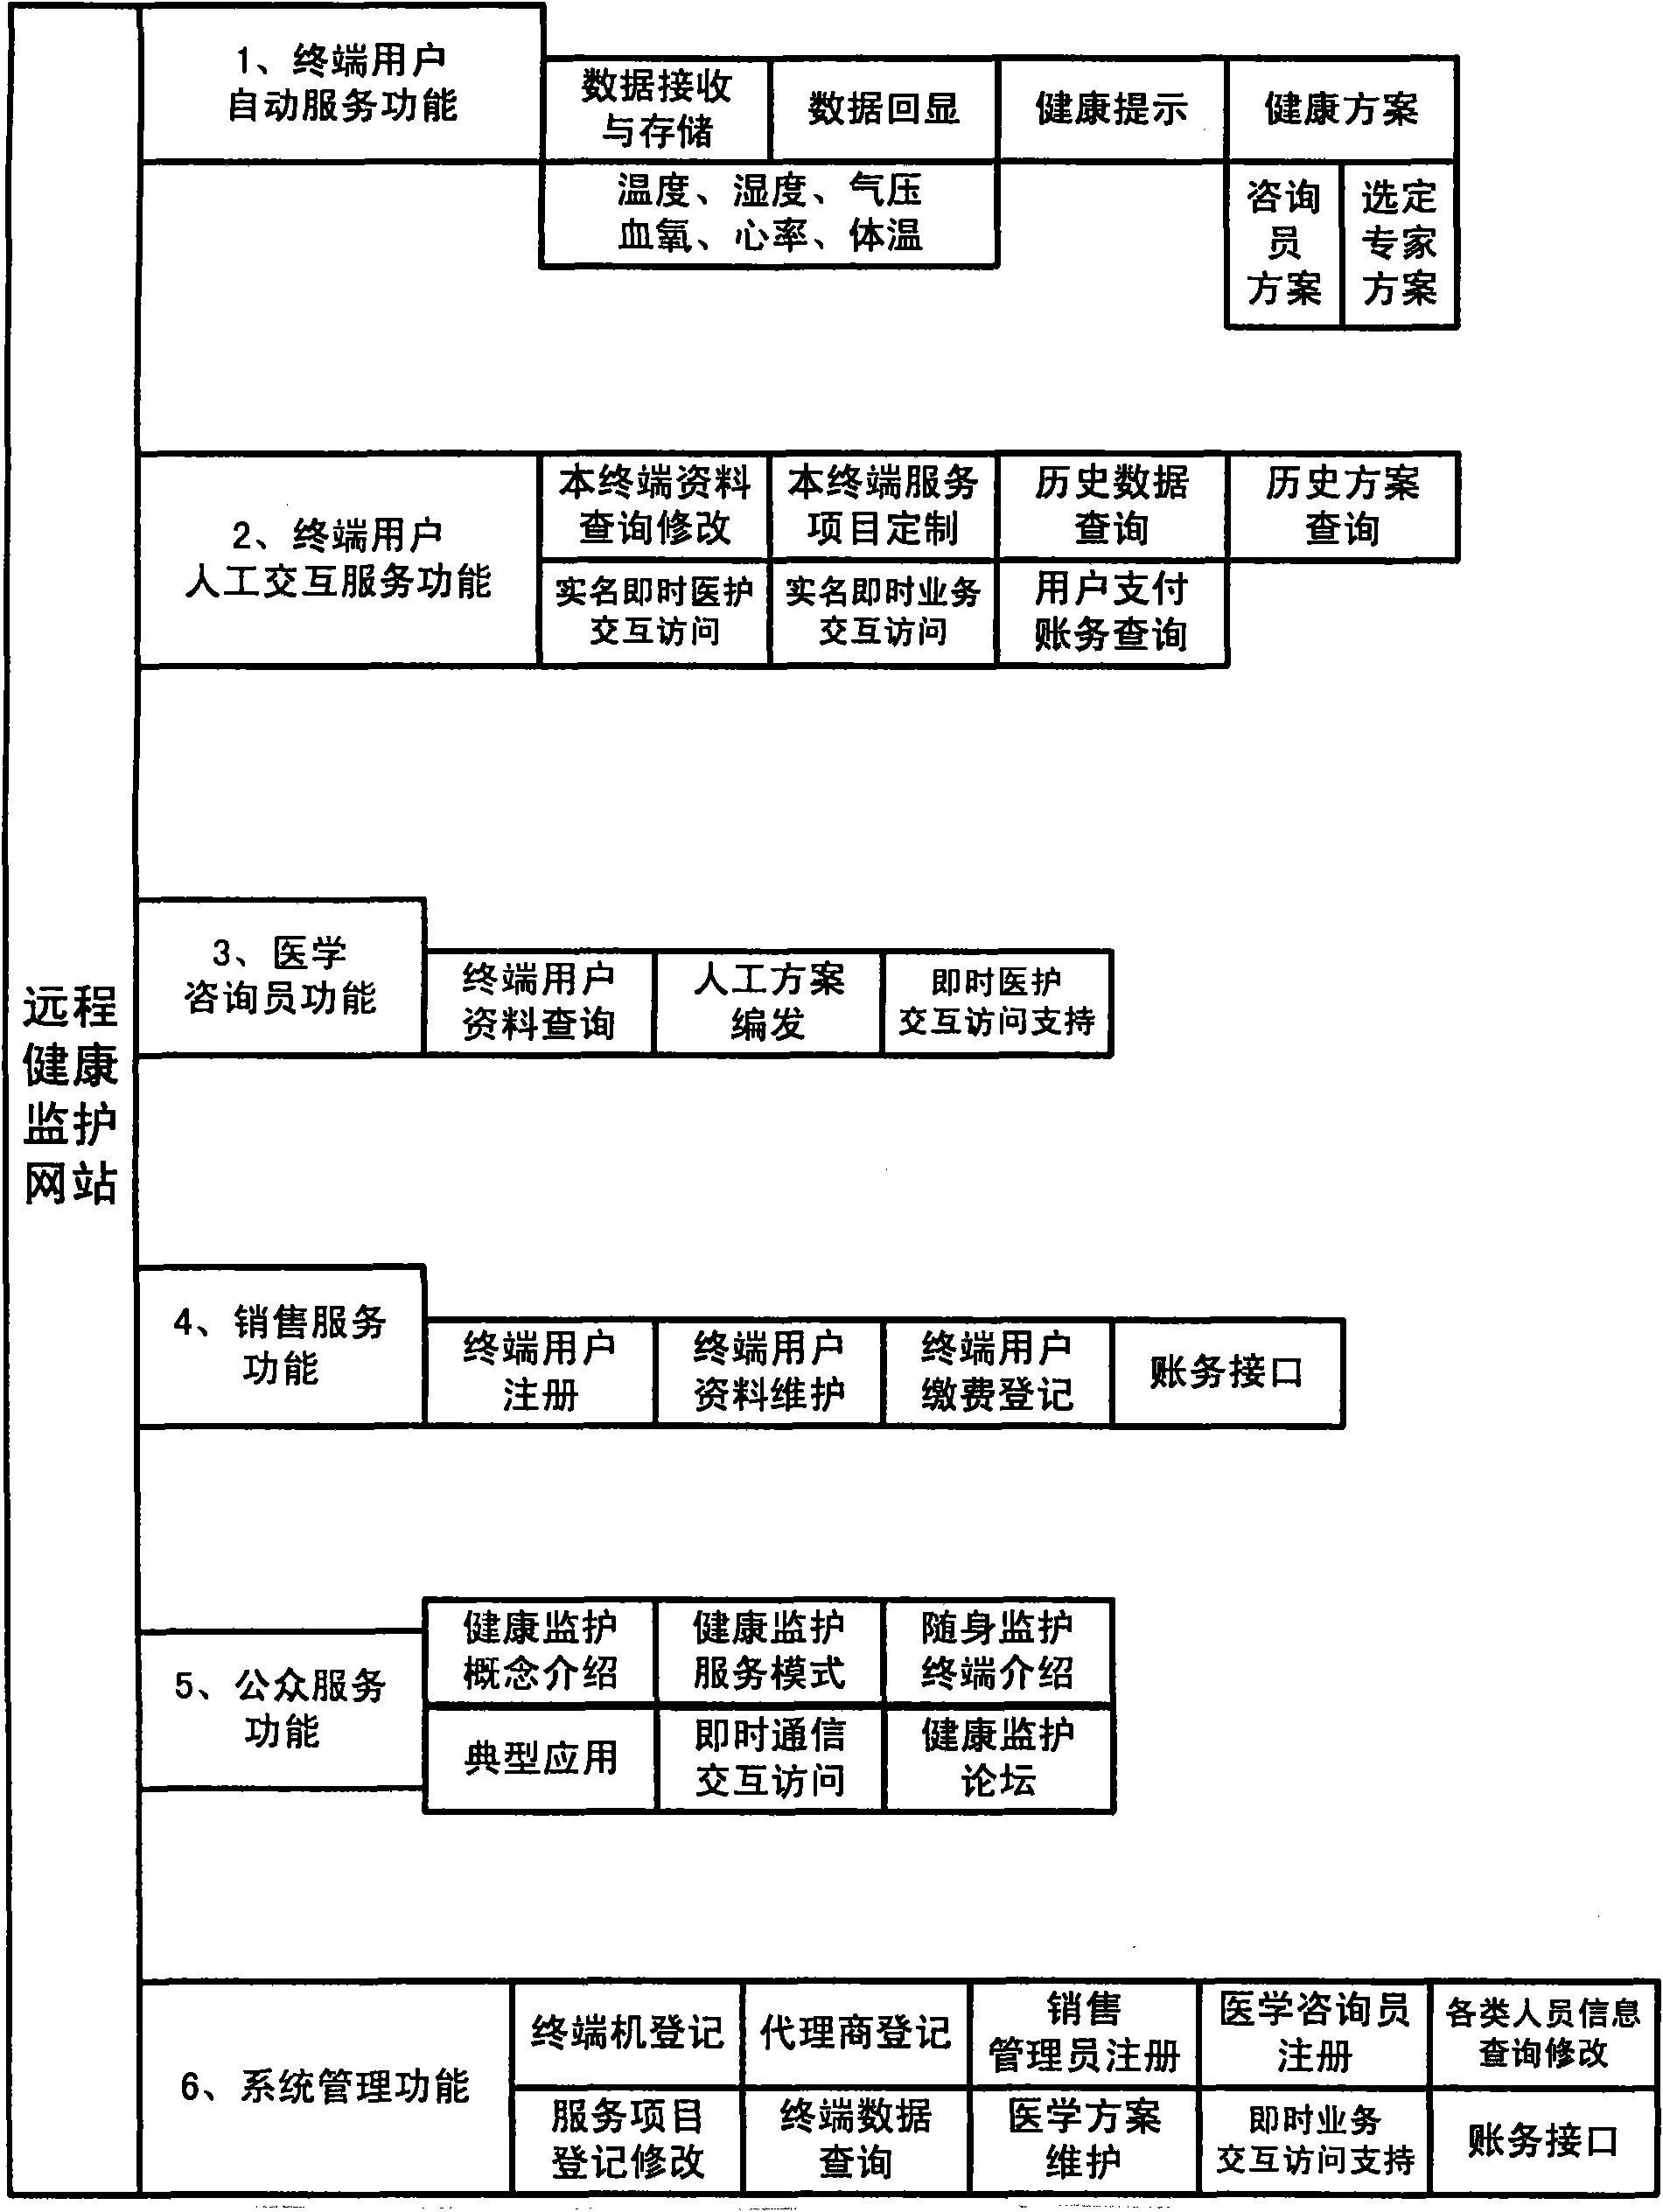 Remote health monitoring system based on portable monitoring terminal with wireless communication function